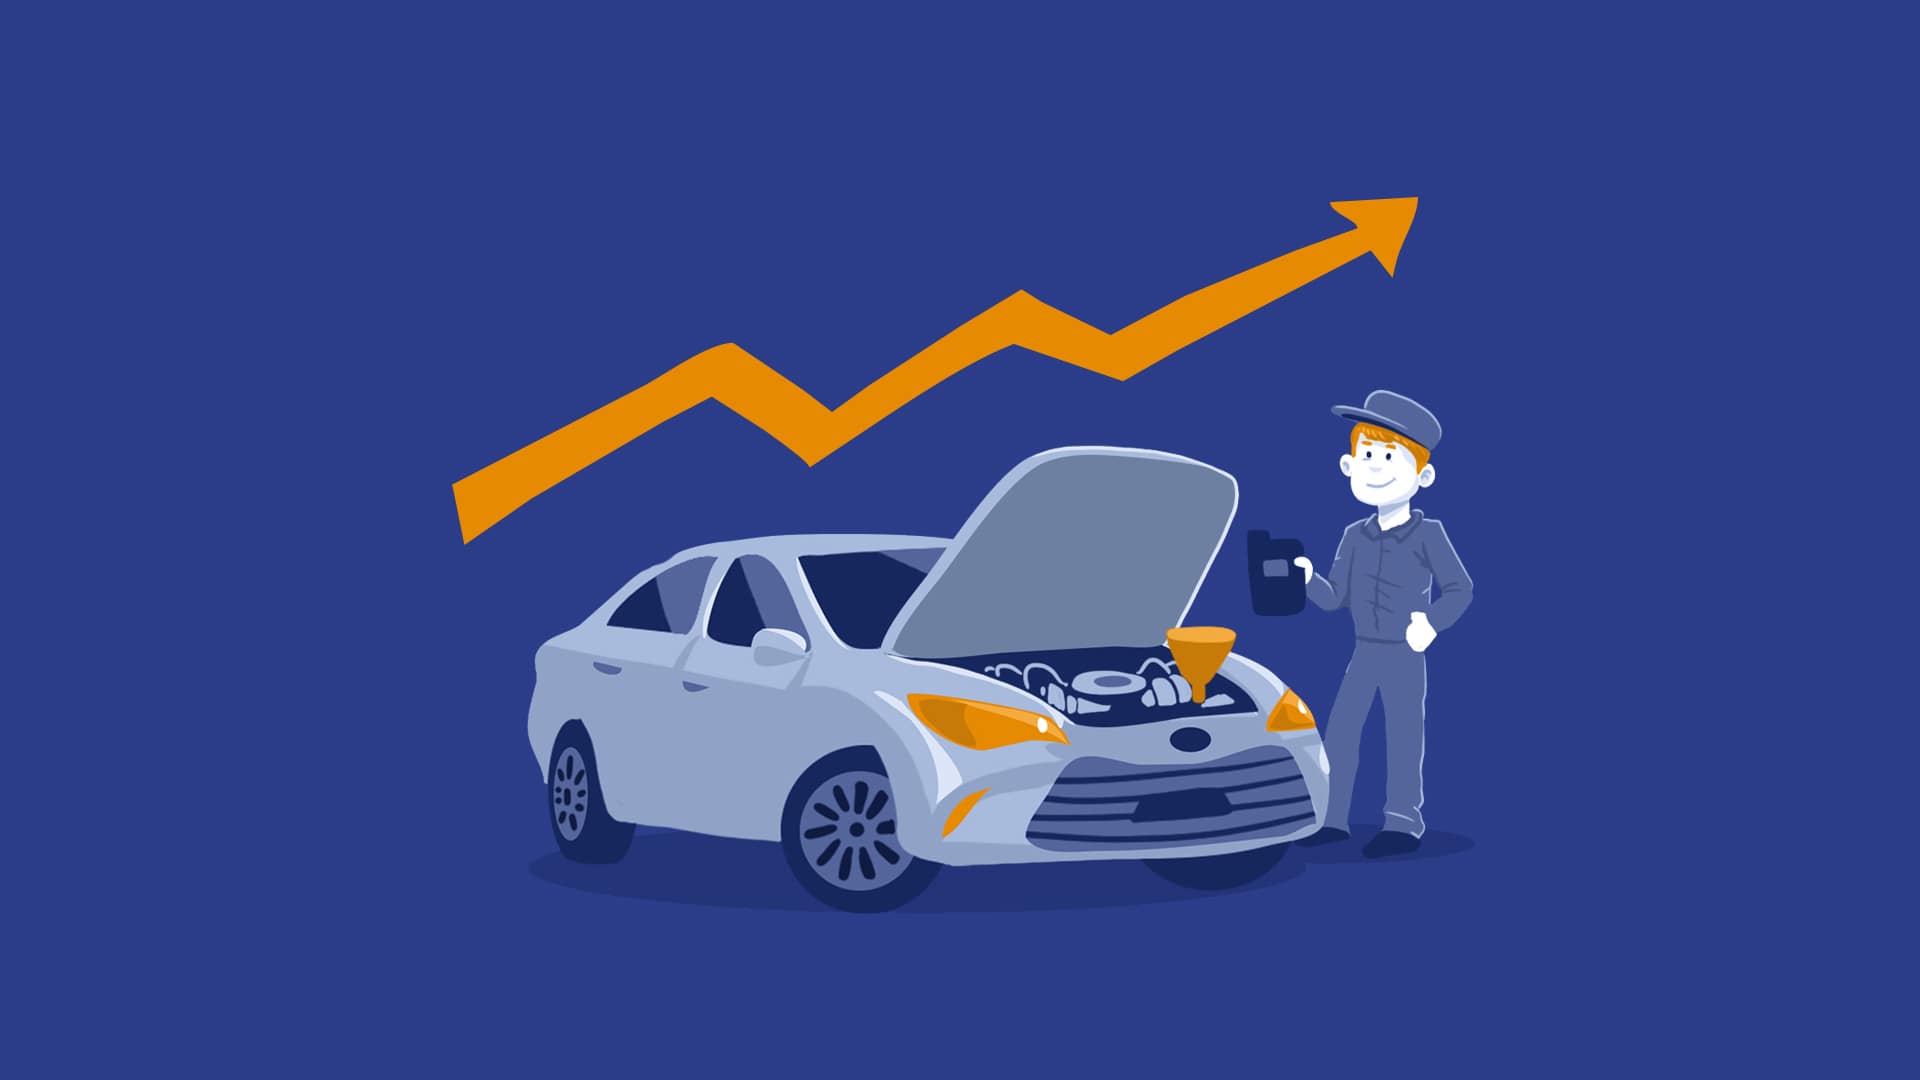 Mechanic Fixing Car With Positive Trend Arrow Behind him